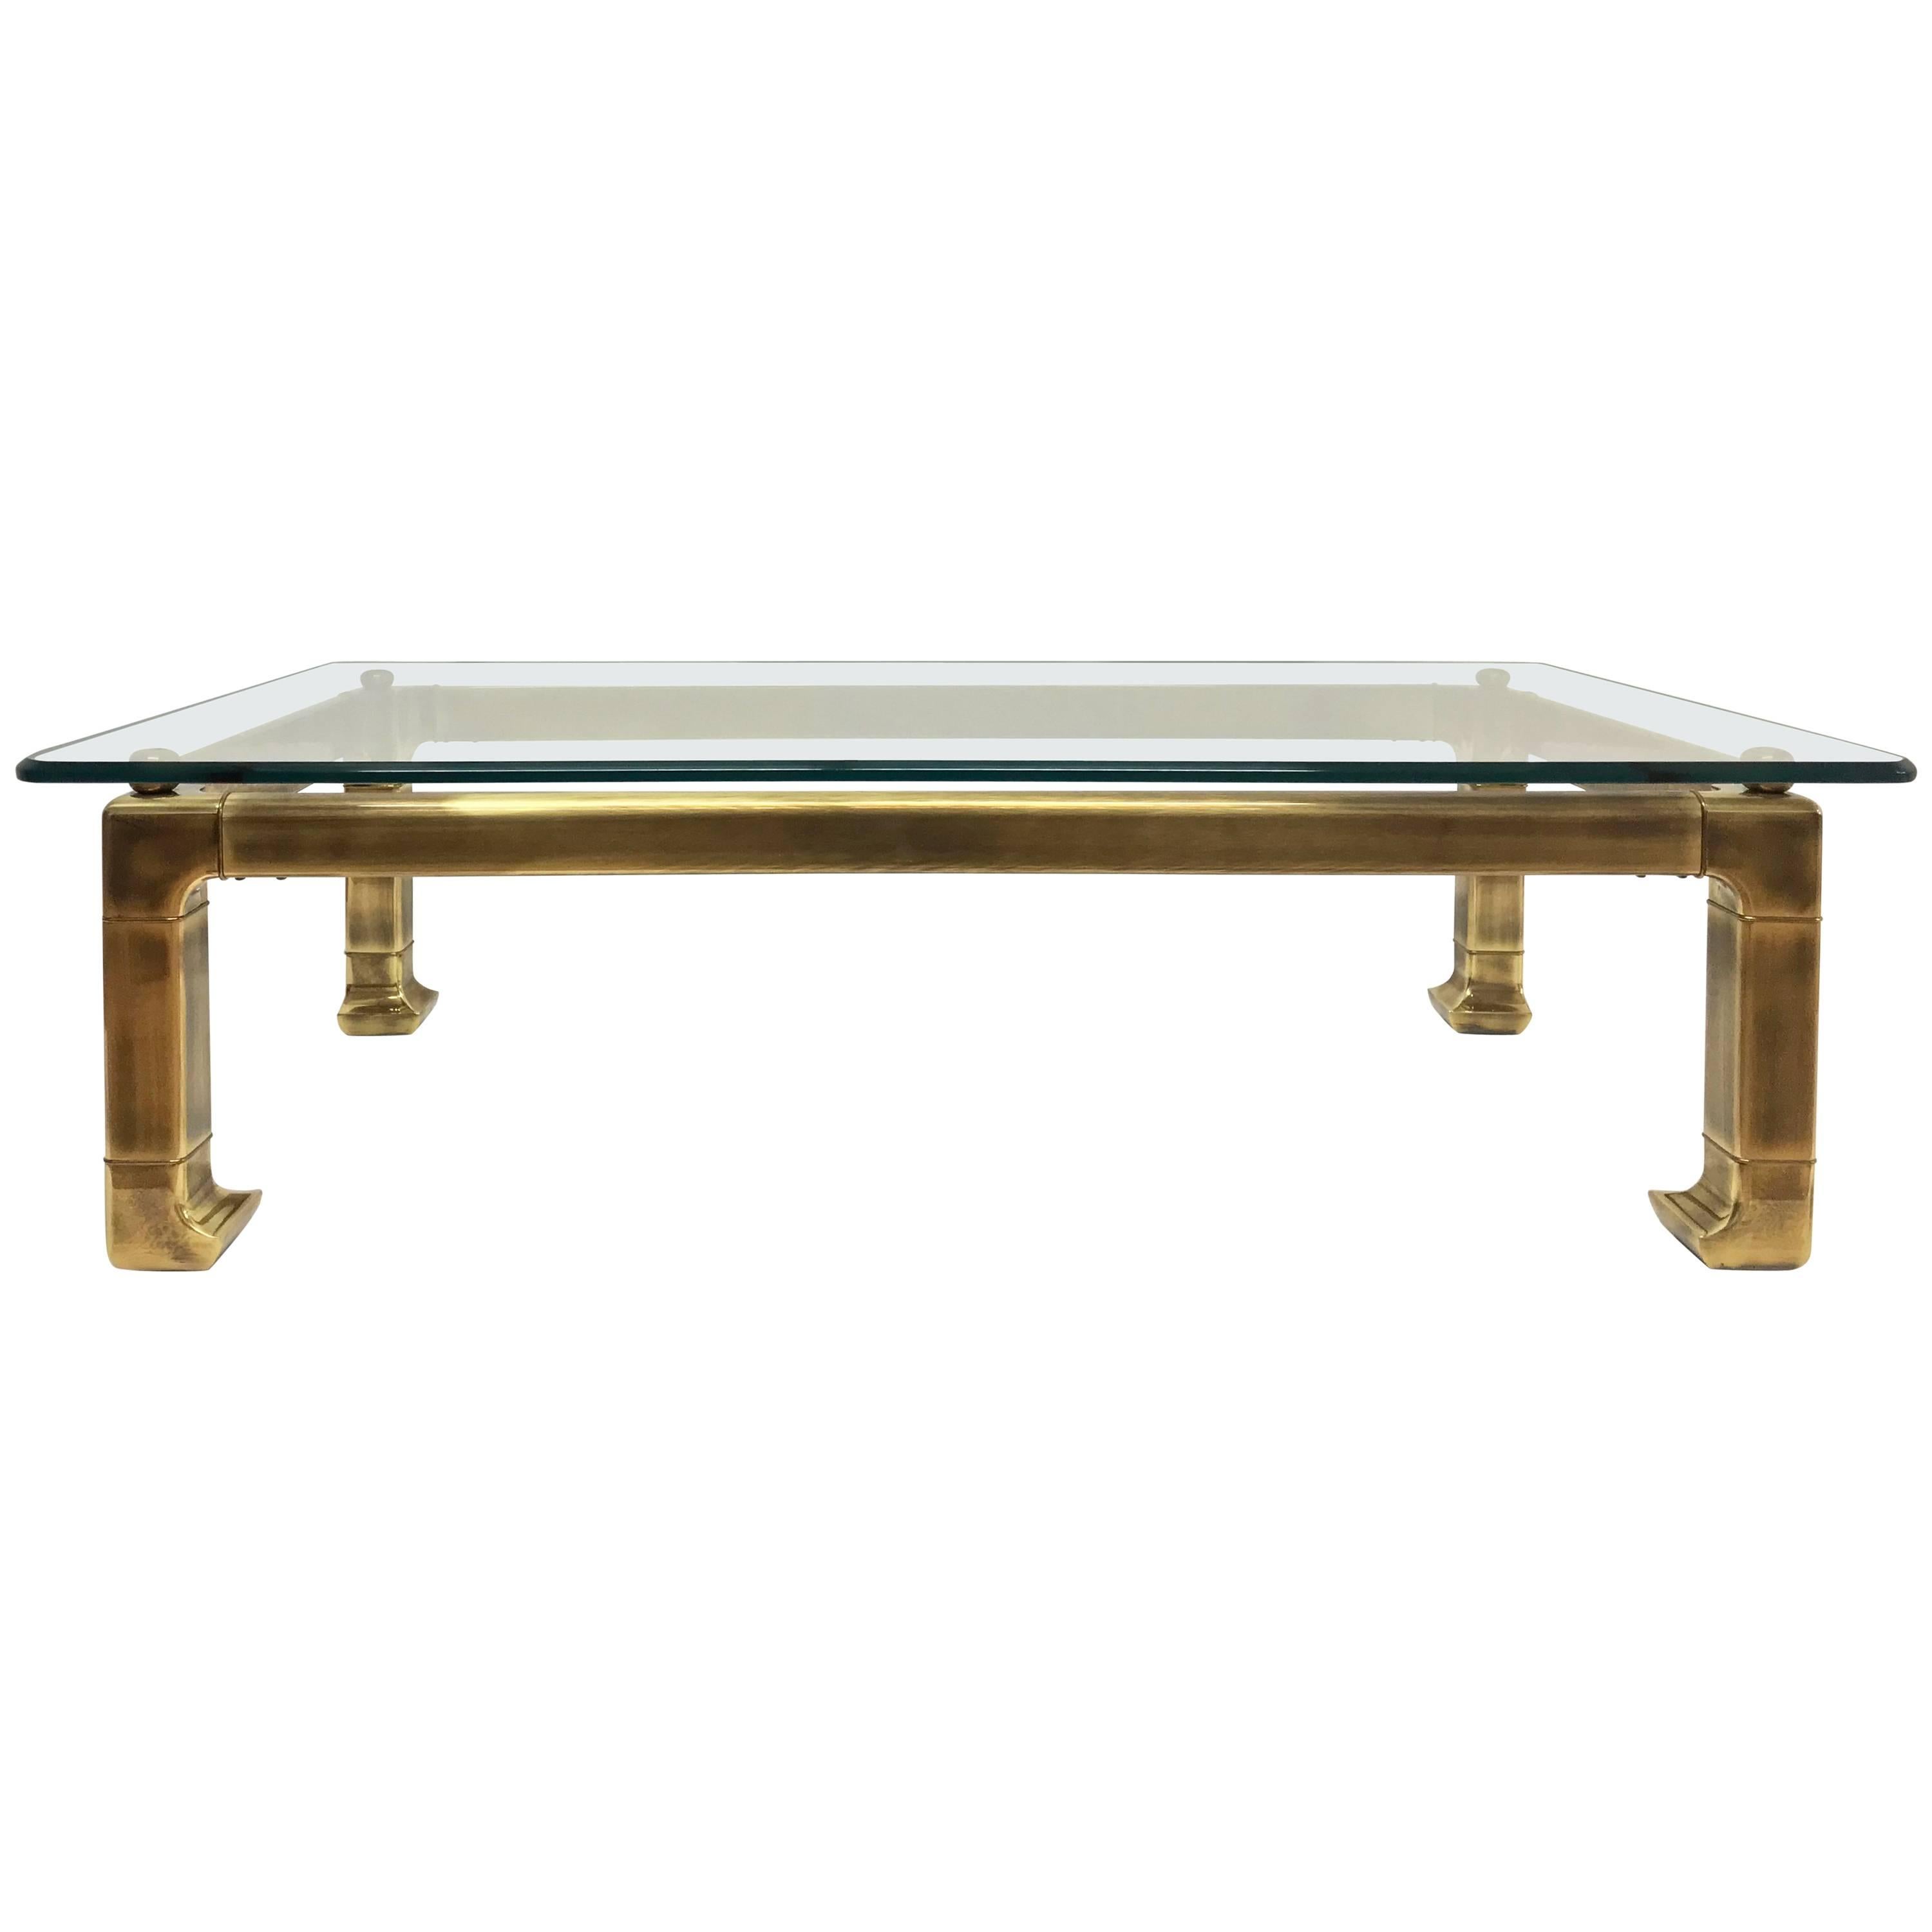 Rectangular Lacquered Brass Coffee Table with Asian Styling by Mastercraft, 1970